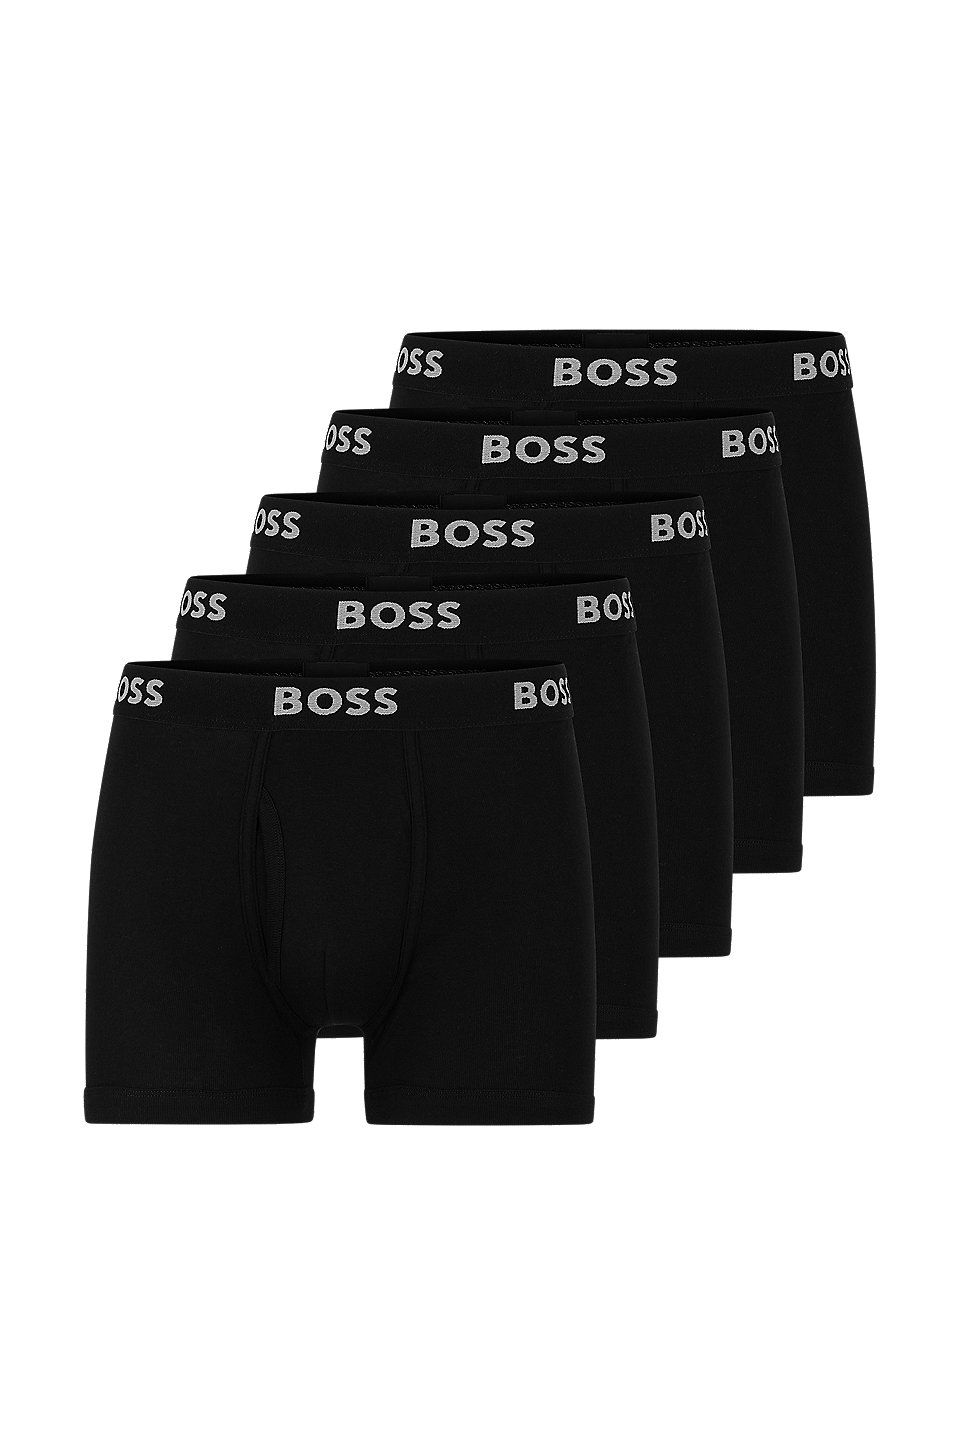 BOSS - Five-pack of boxer briefs with logo waistbands